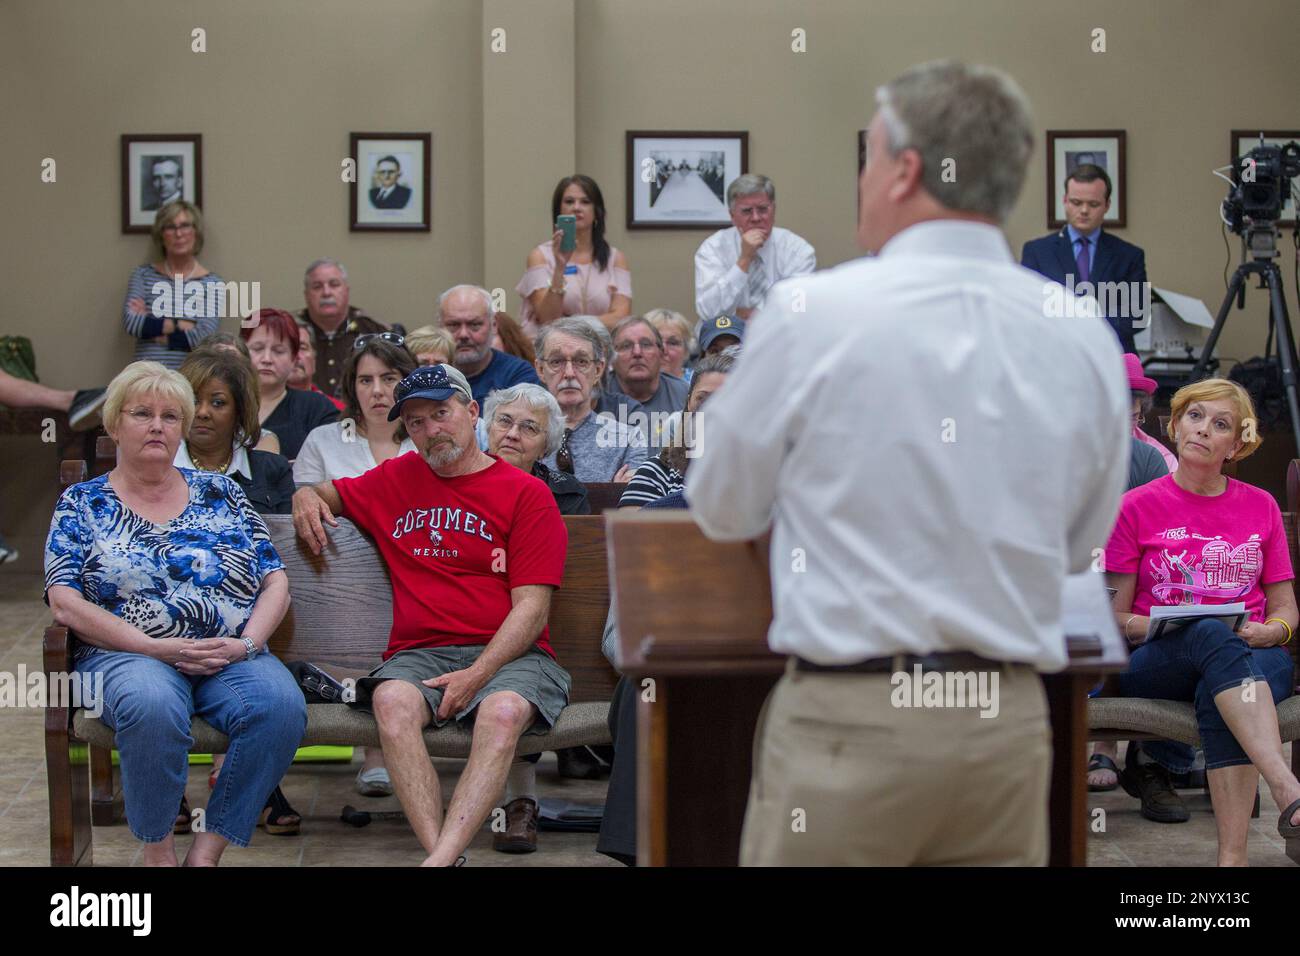 U.S. Rep. James Comer, R - Kentucky, speaks during a town hall Wednesday,  May 10, 2017, in the courthouse at the Marshall County Town Hall in Benton,  Ky. About 140 people attended